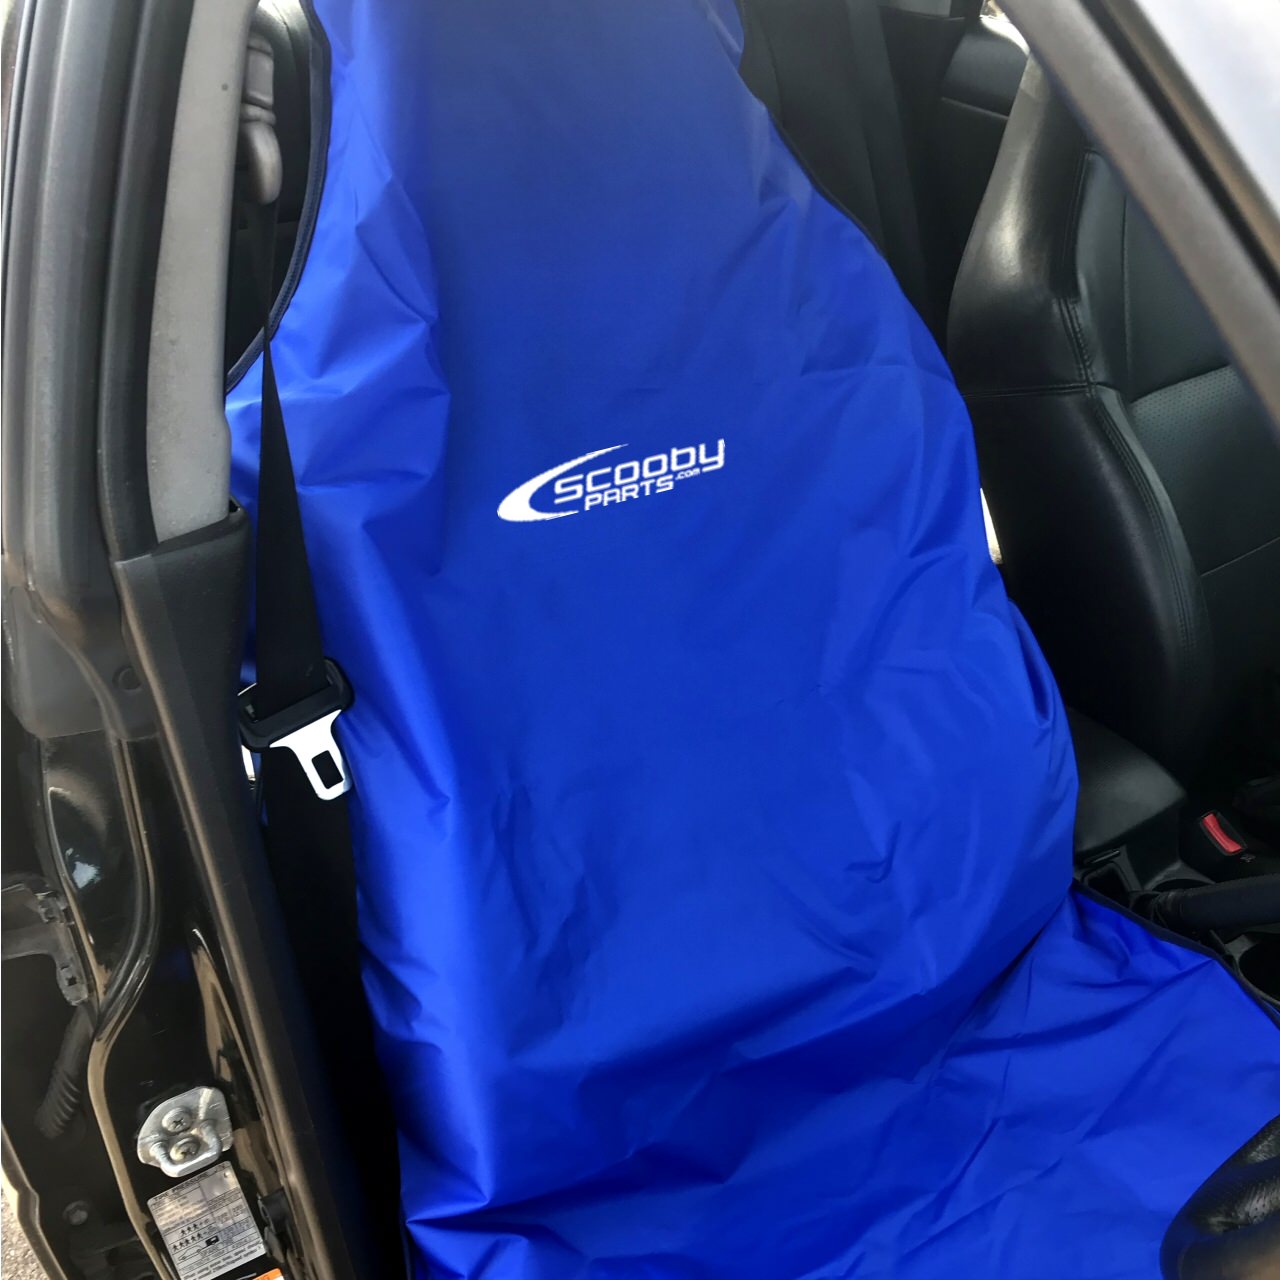 Airbag Compatible Seat Cover for Subaru Impreza, Legacy and Forester with Logo - Blue_1